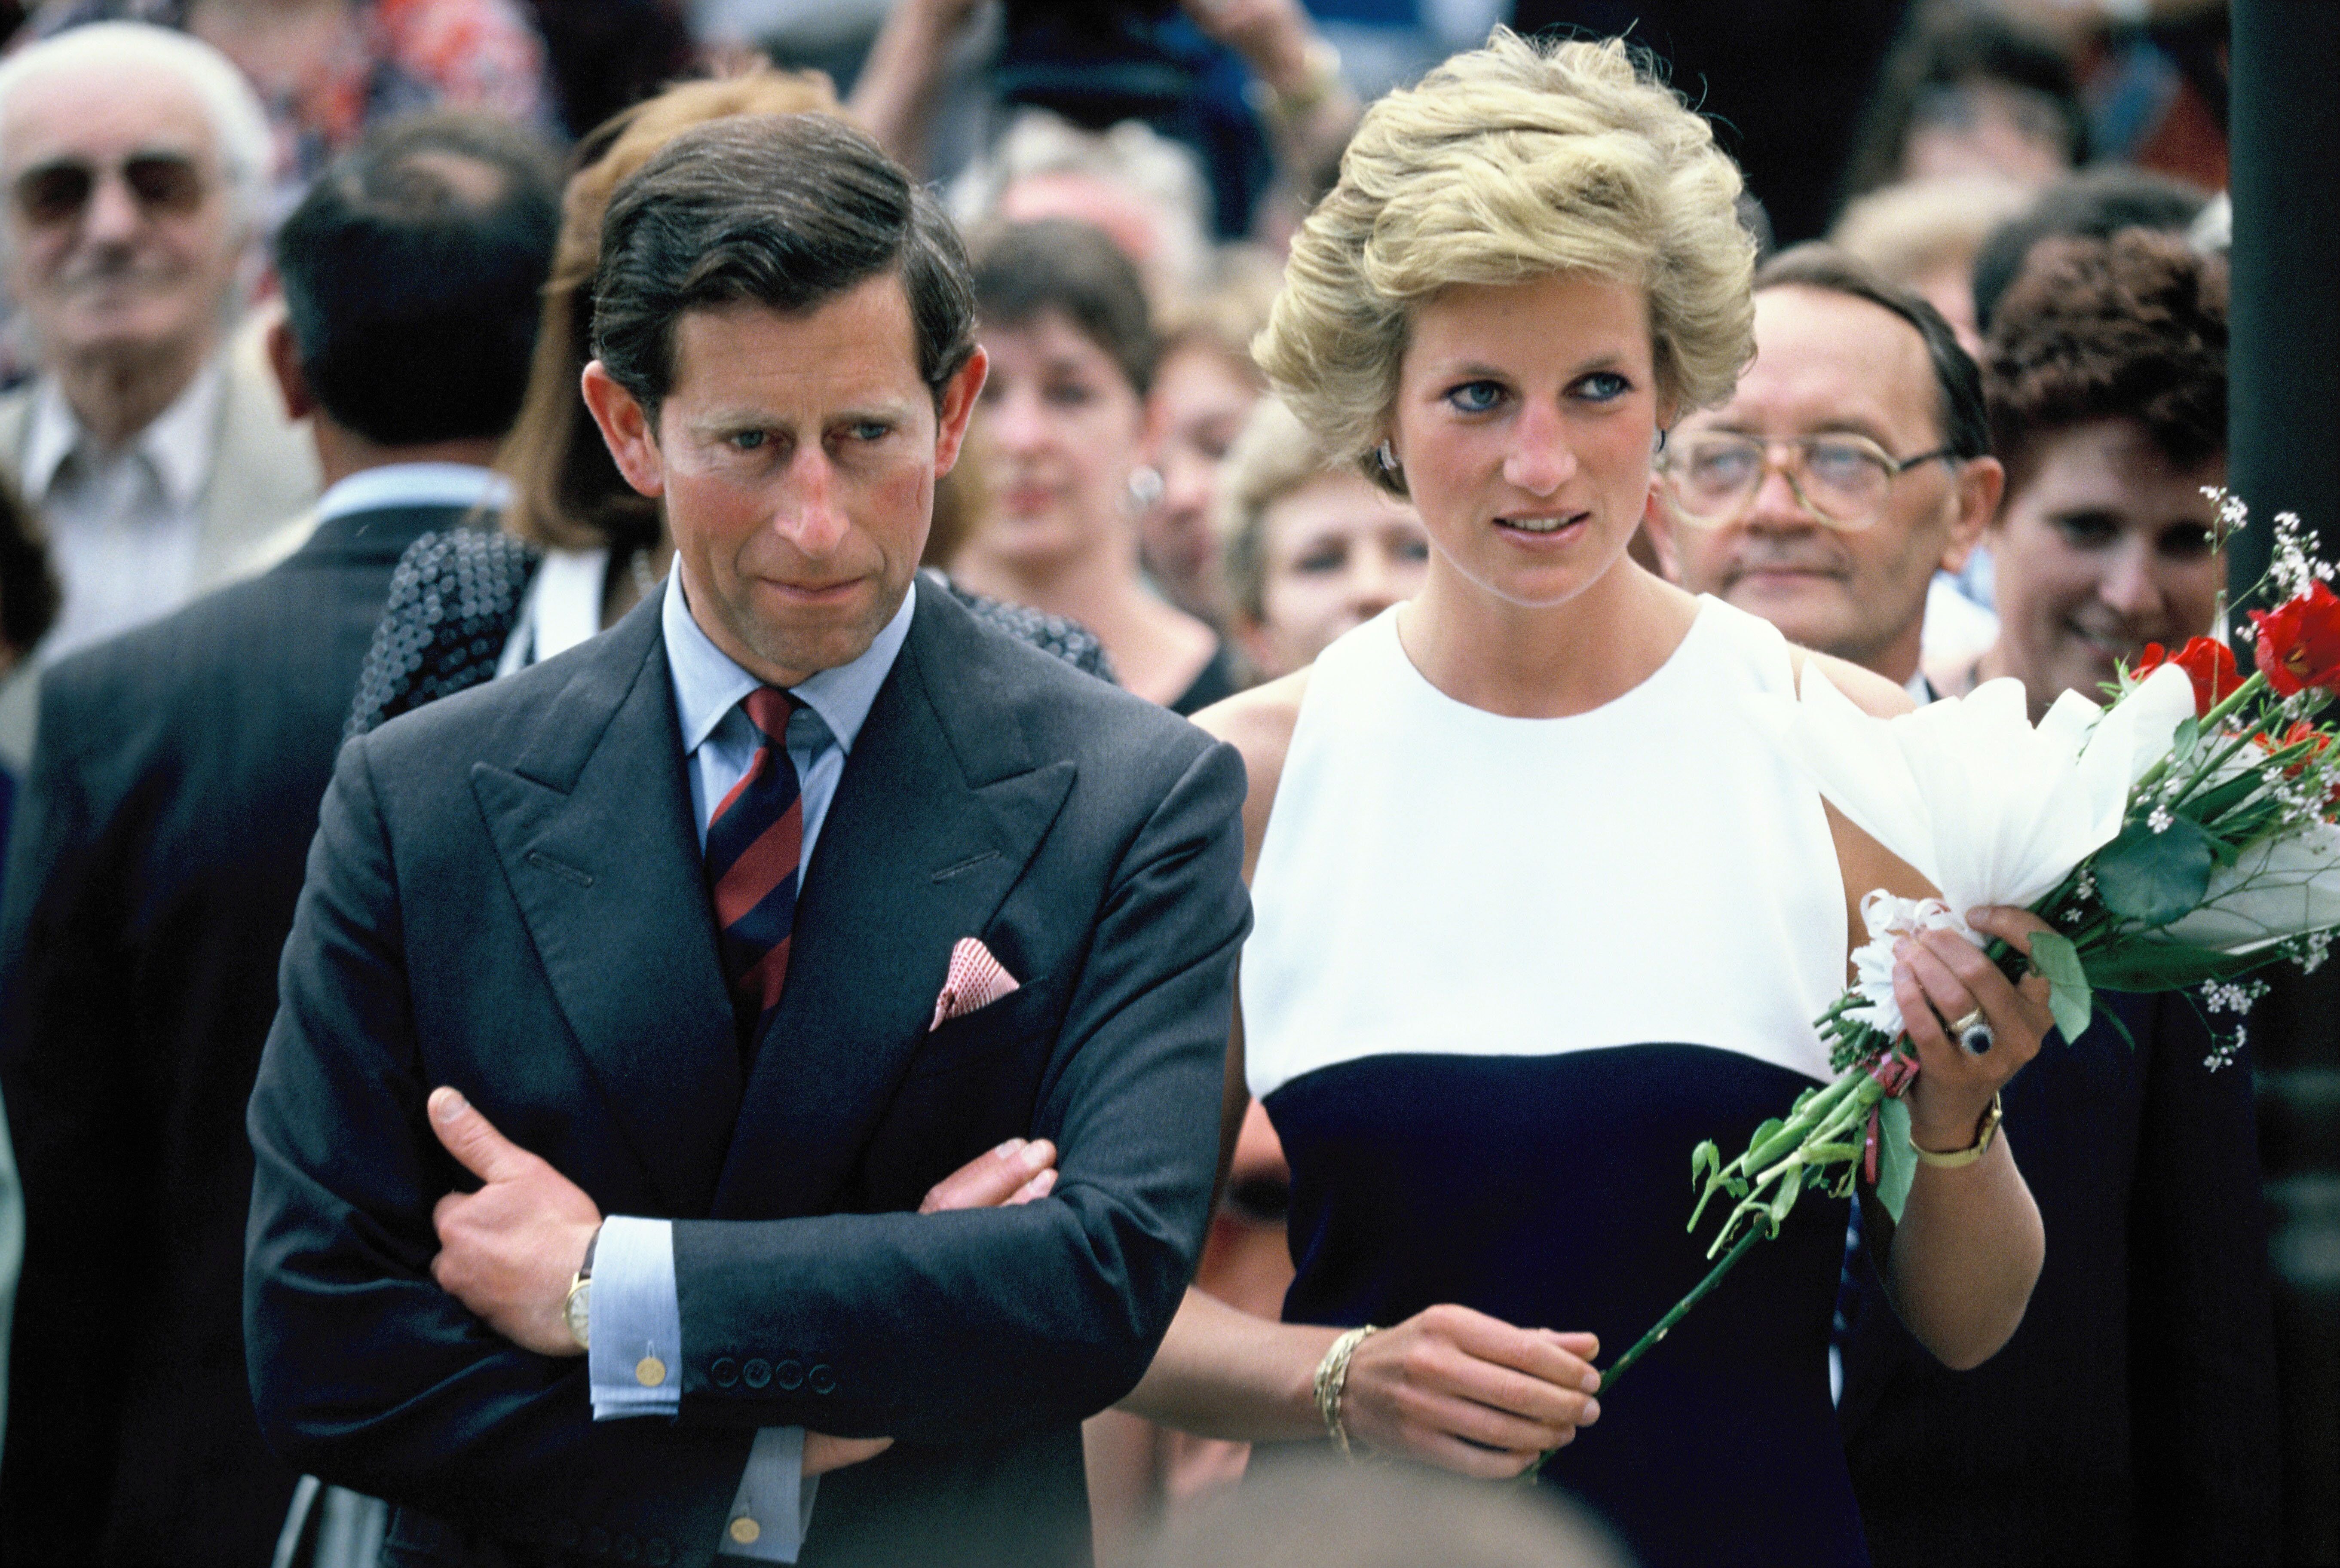  Charles and Diana, Prince and Princess of Wales, during their official visit to Hungary. | Source: Getty Images